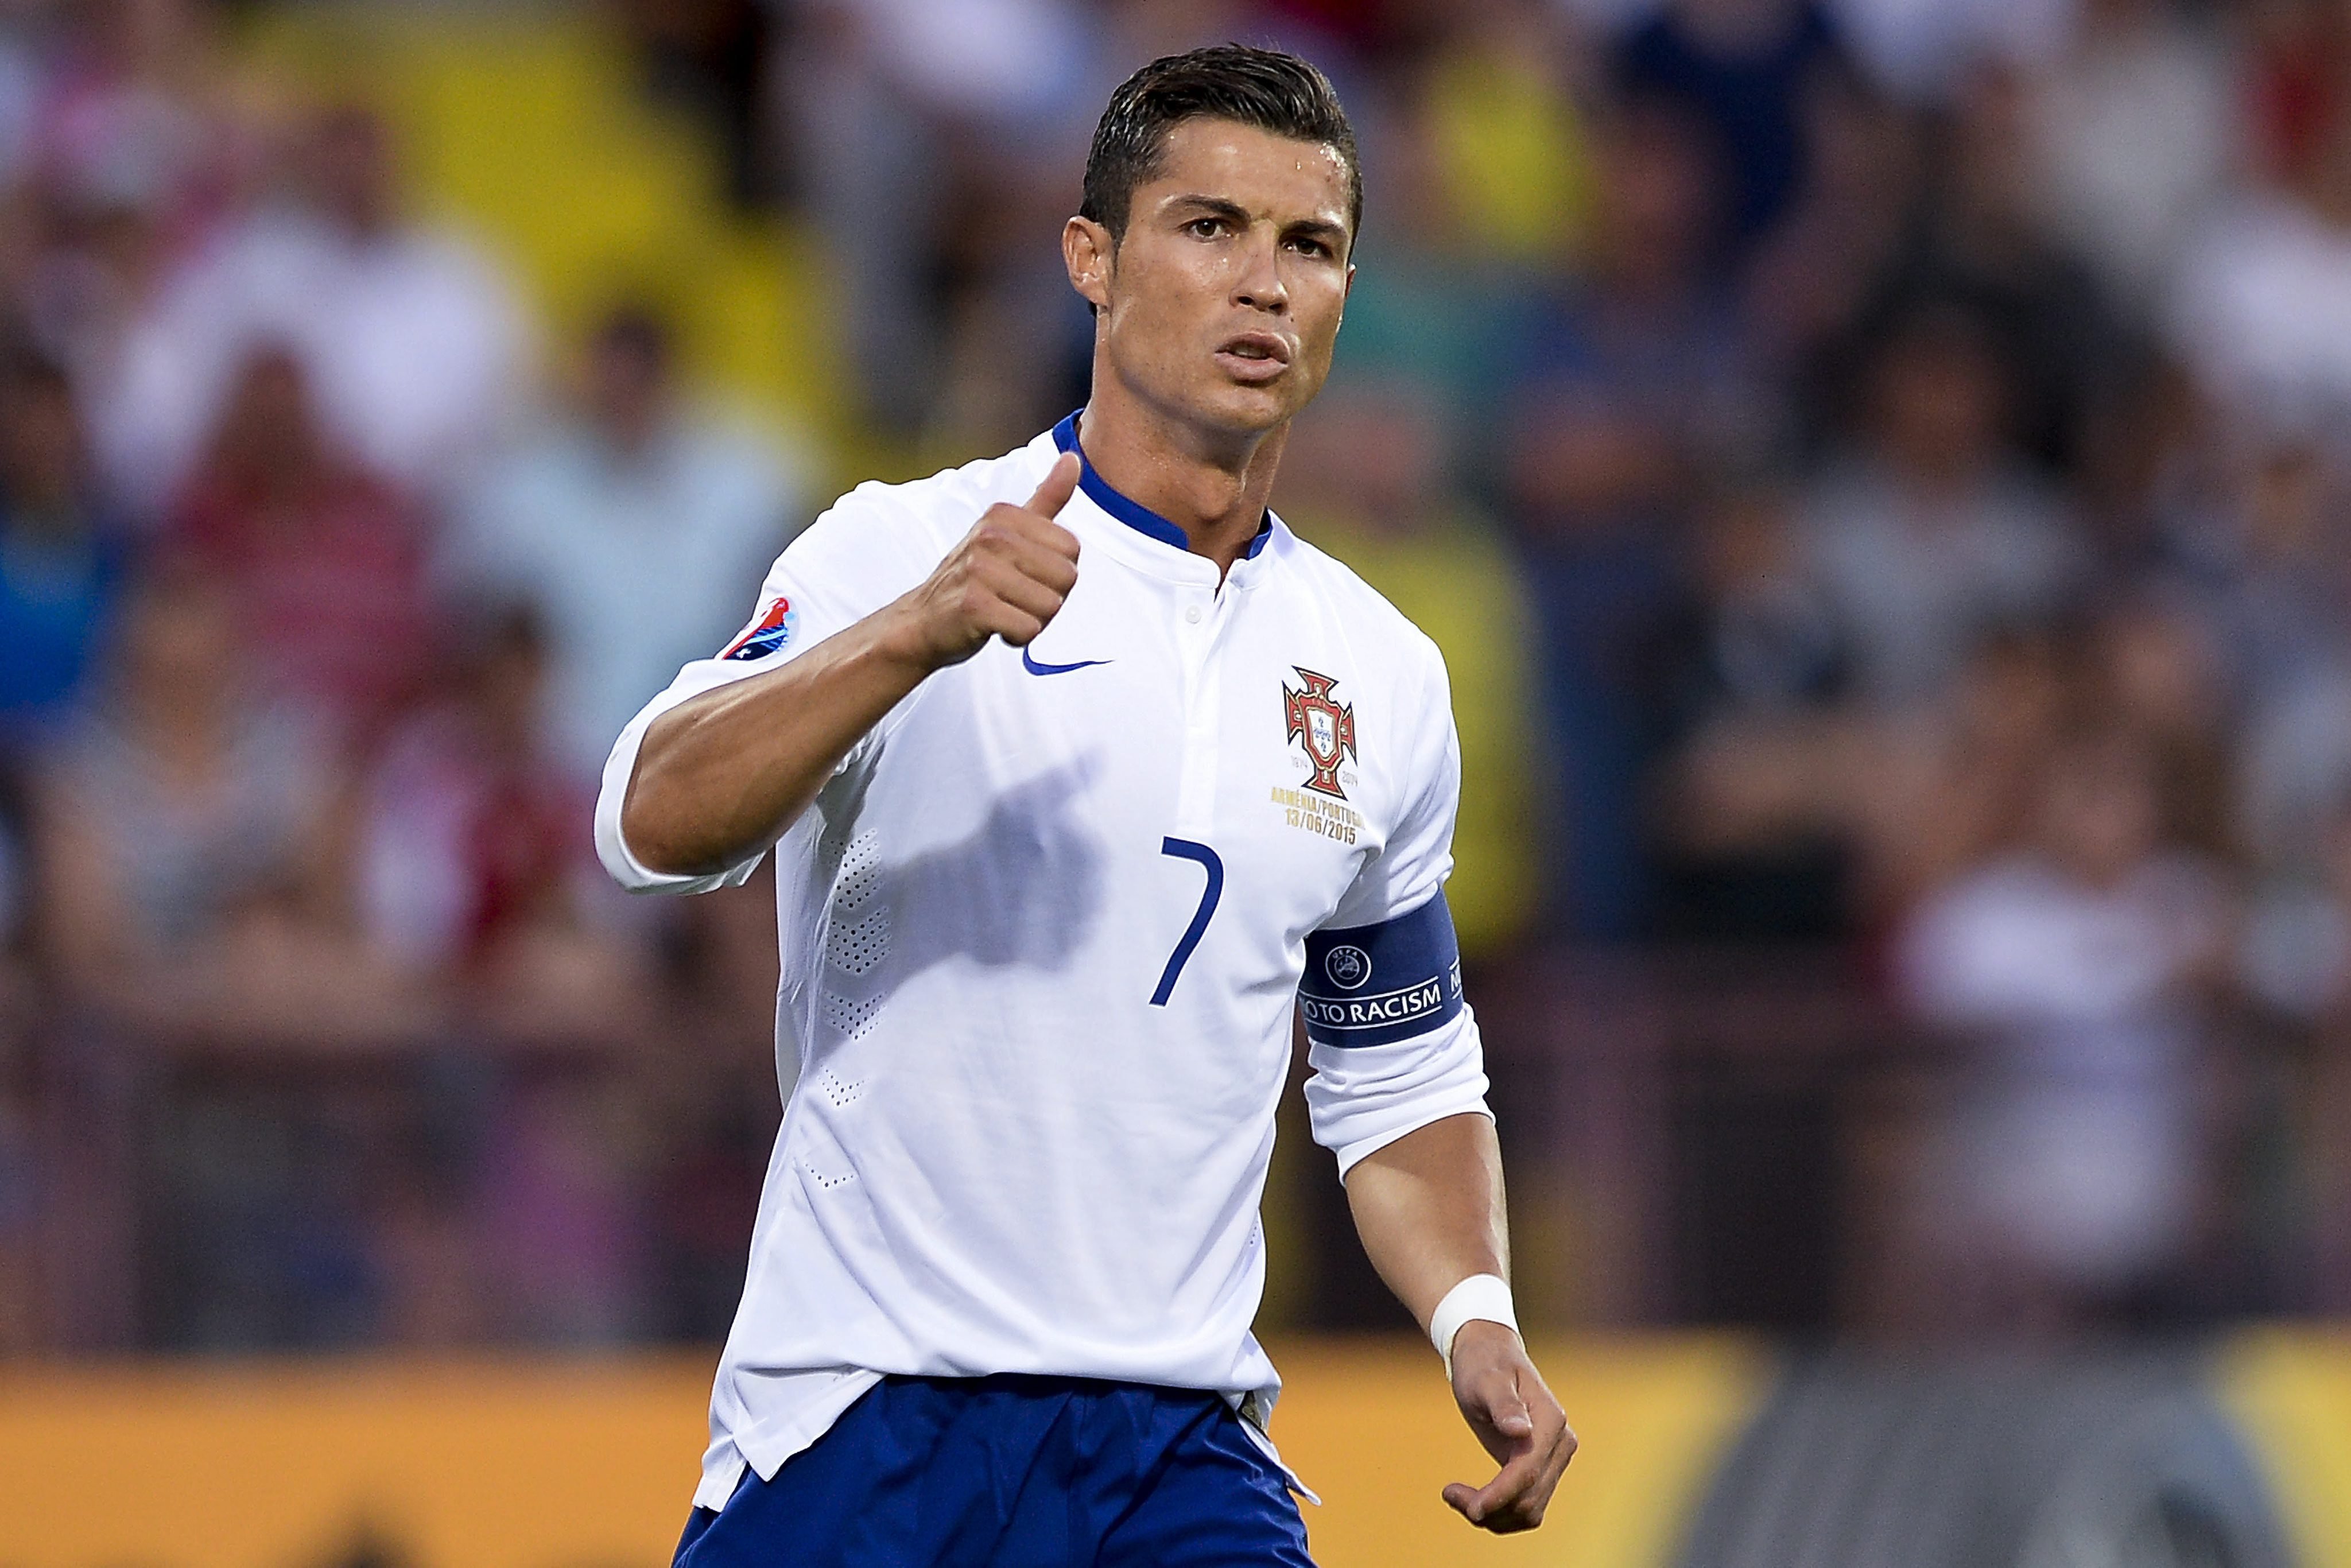 Portugal player Cristiano Ronaldo gestures during the UEFA EURO 2016 Qualifying - Group I soccer match against Armenia held at Republican Stadium in Yerevan, Armenia on June 13, 2015.